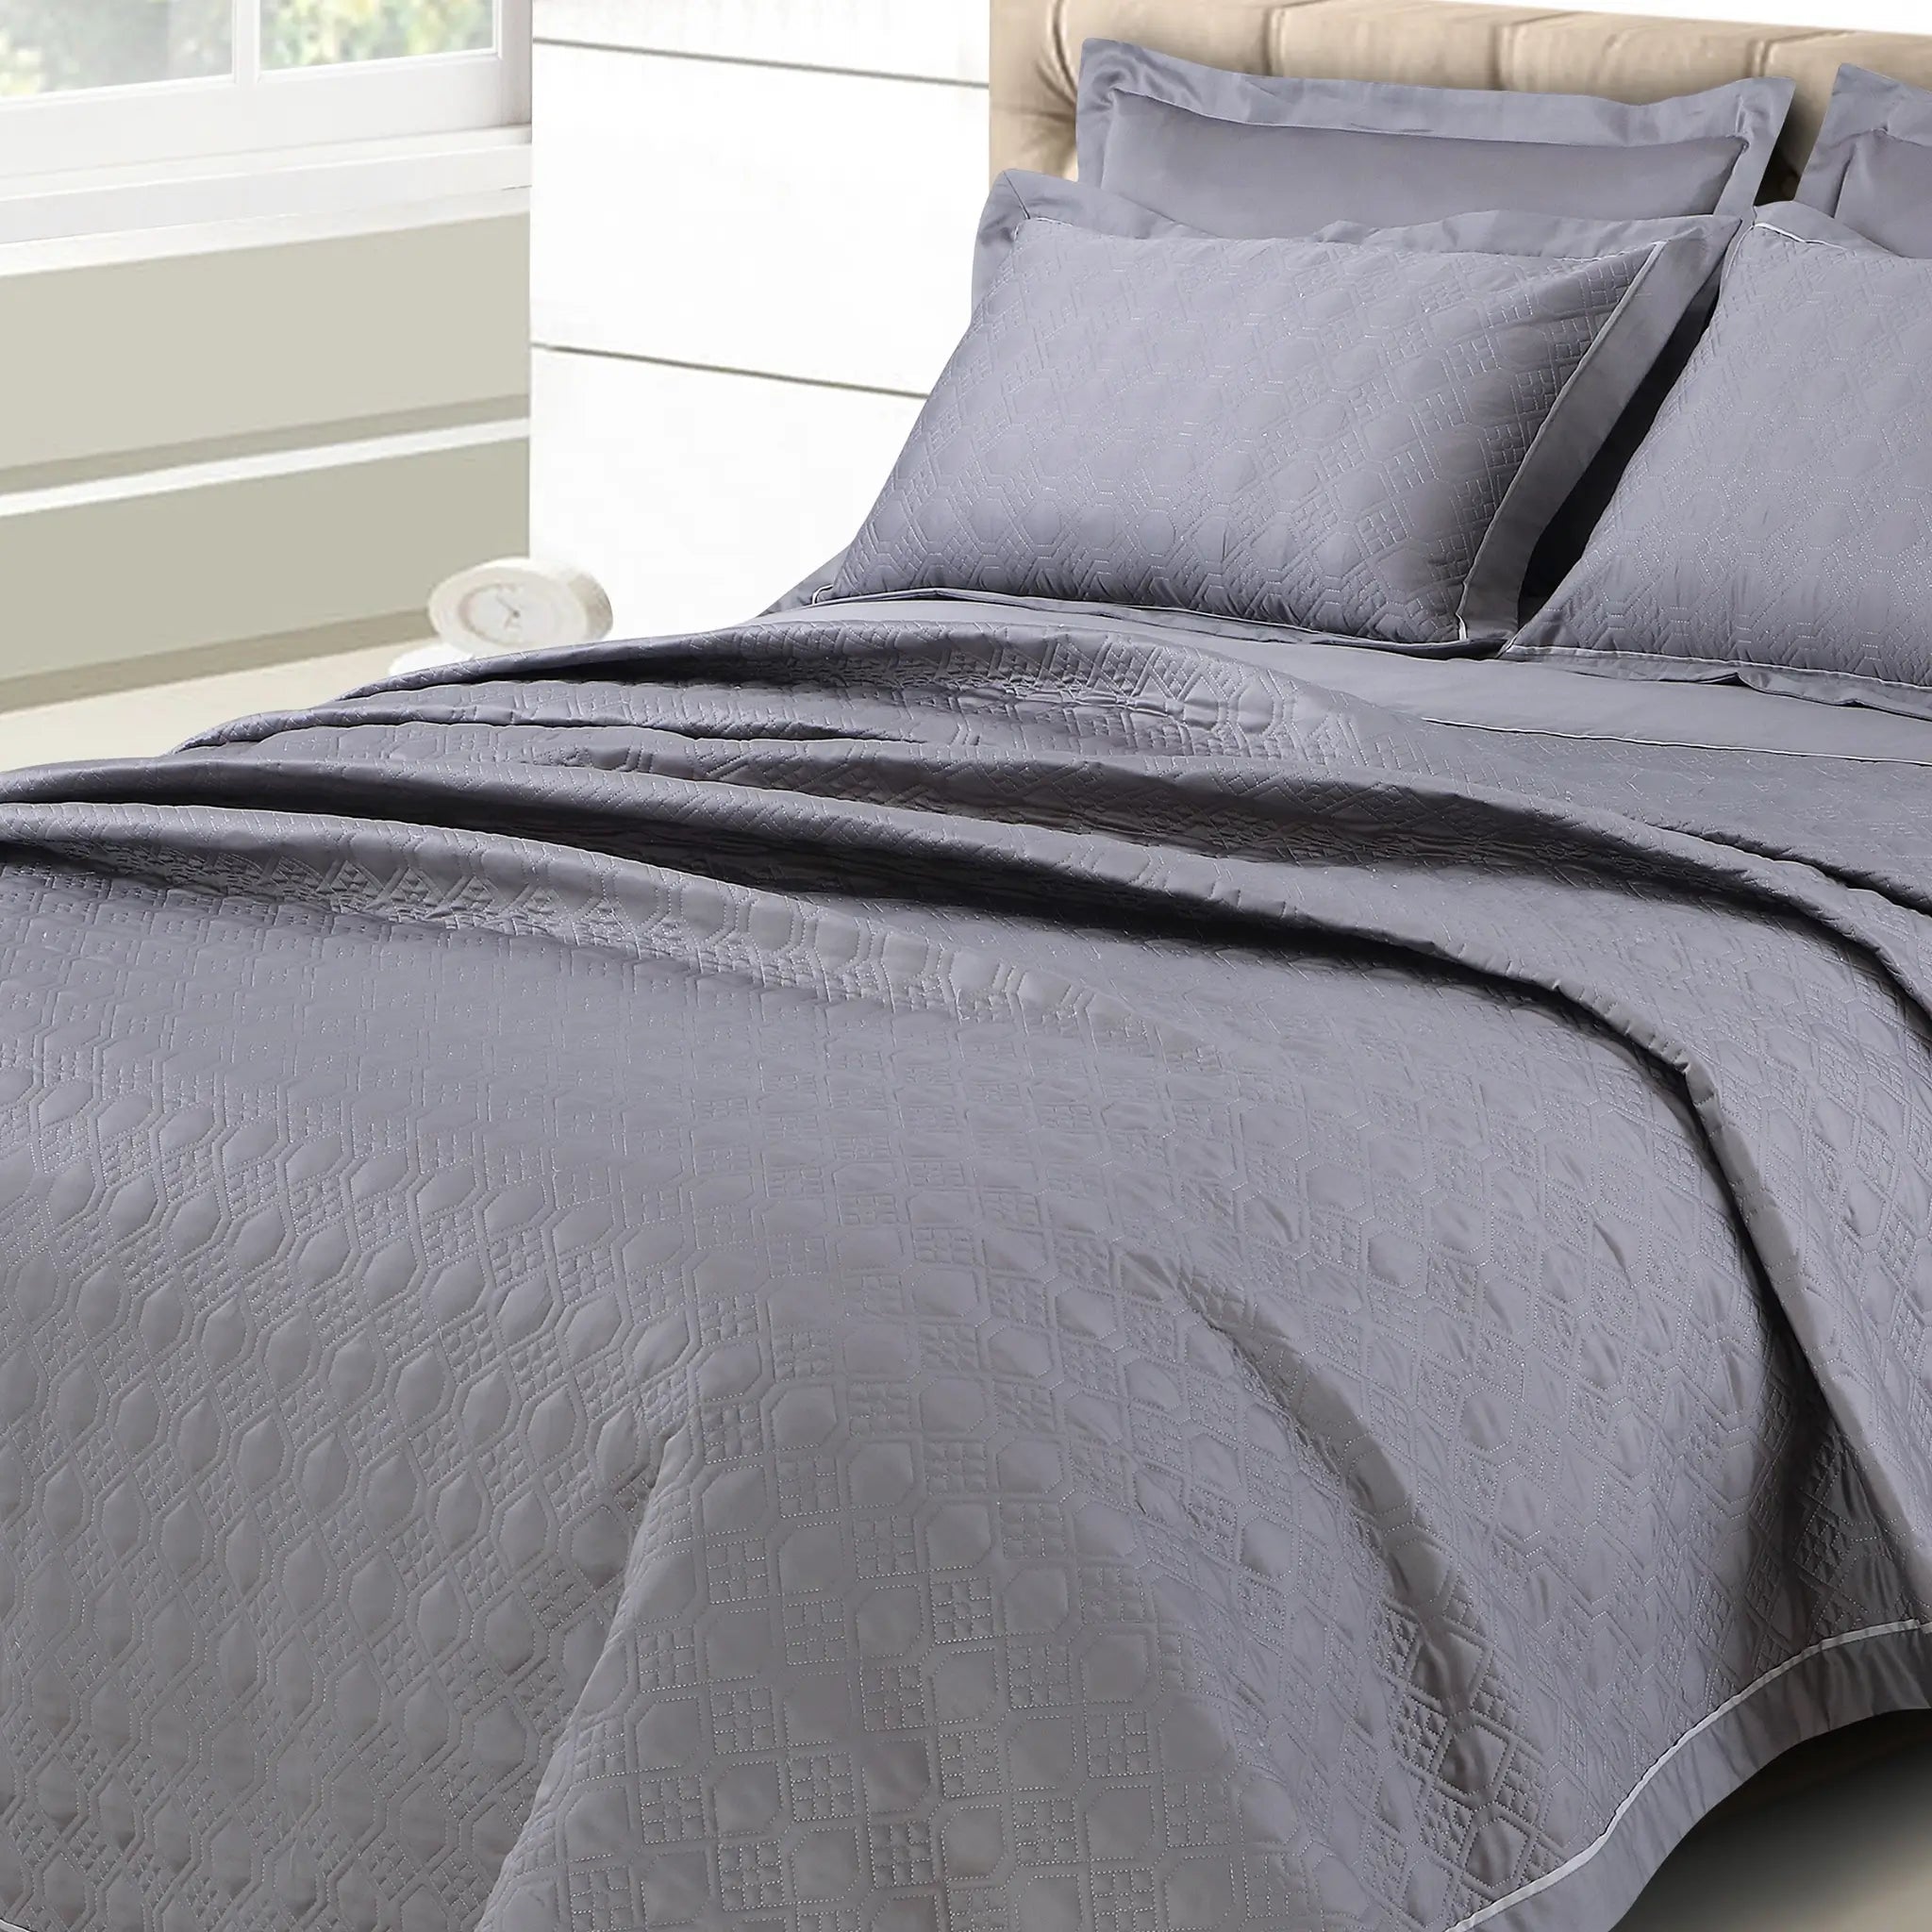 Malako Kairo 500 TC Grey Solid King Size 100% Cotton Quilted Bed Cover/Embroidered Bed Sheet Set - MALAKO